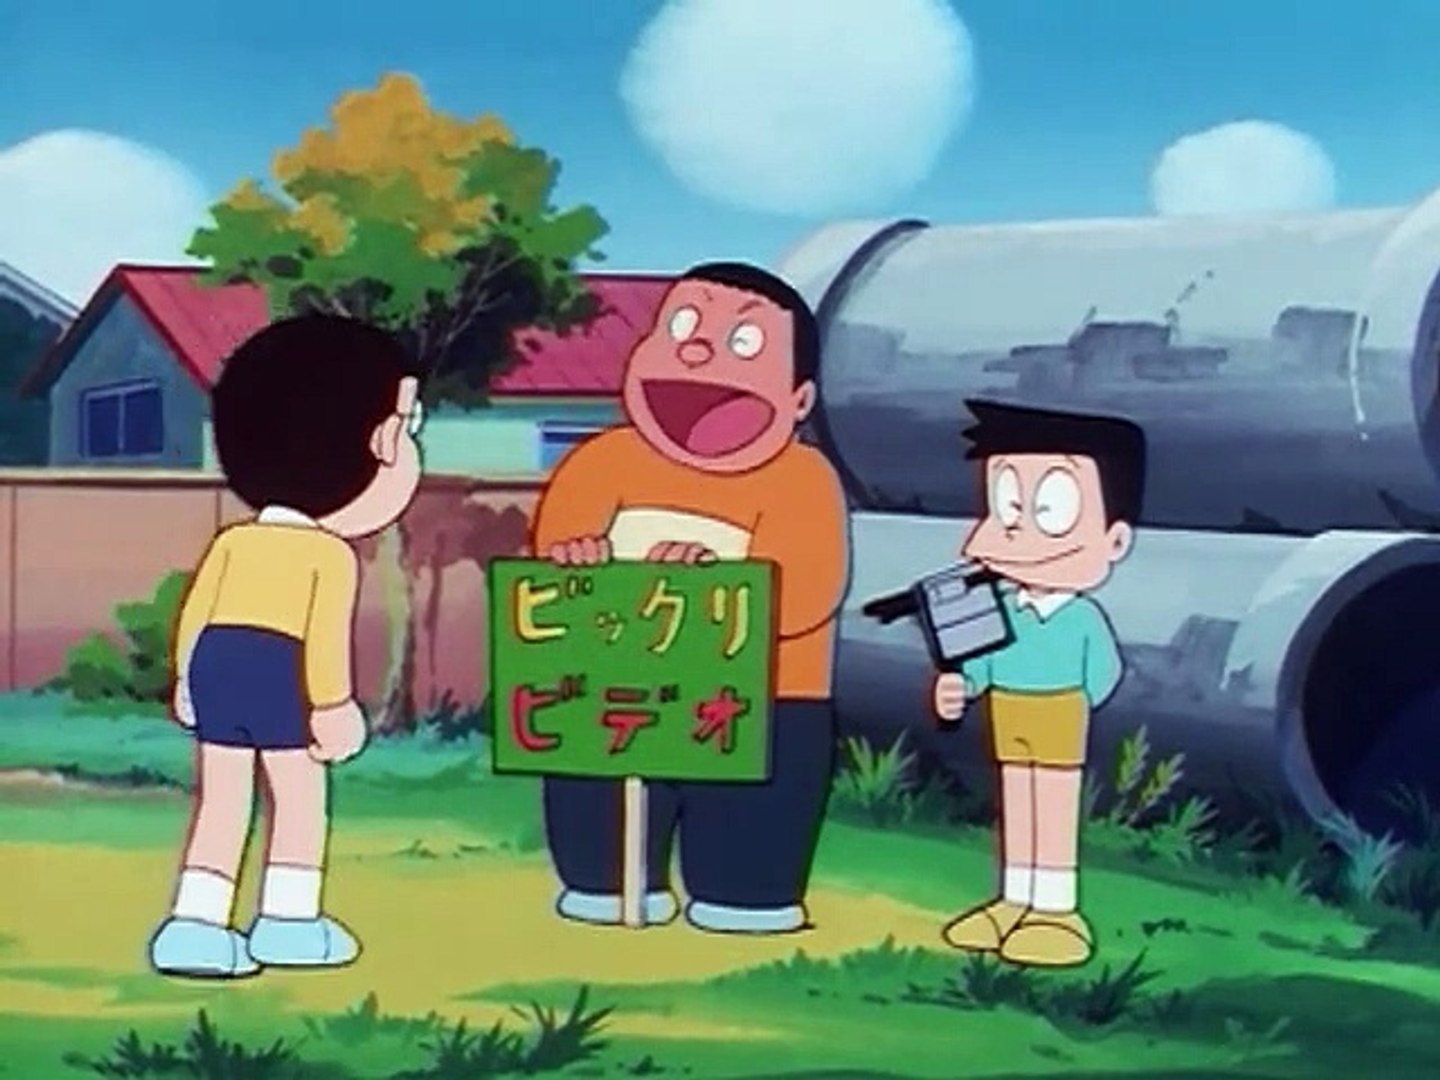 Doraemon Old Episodes by Gillson Toons - Dailymotion